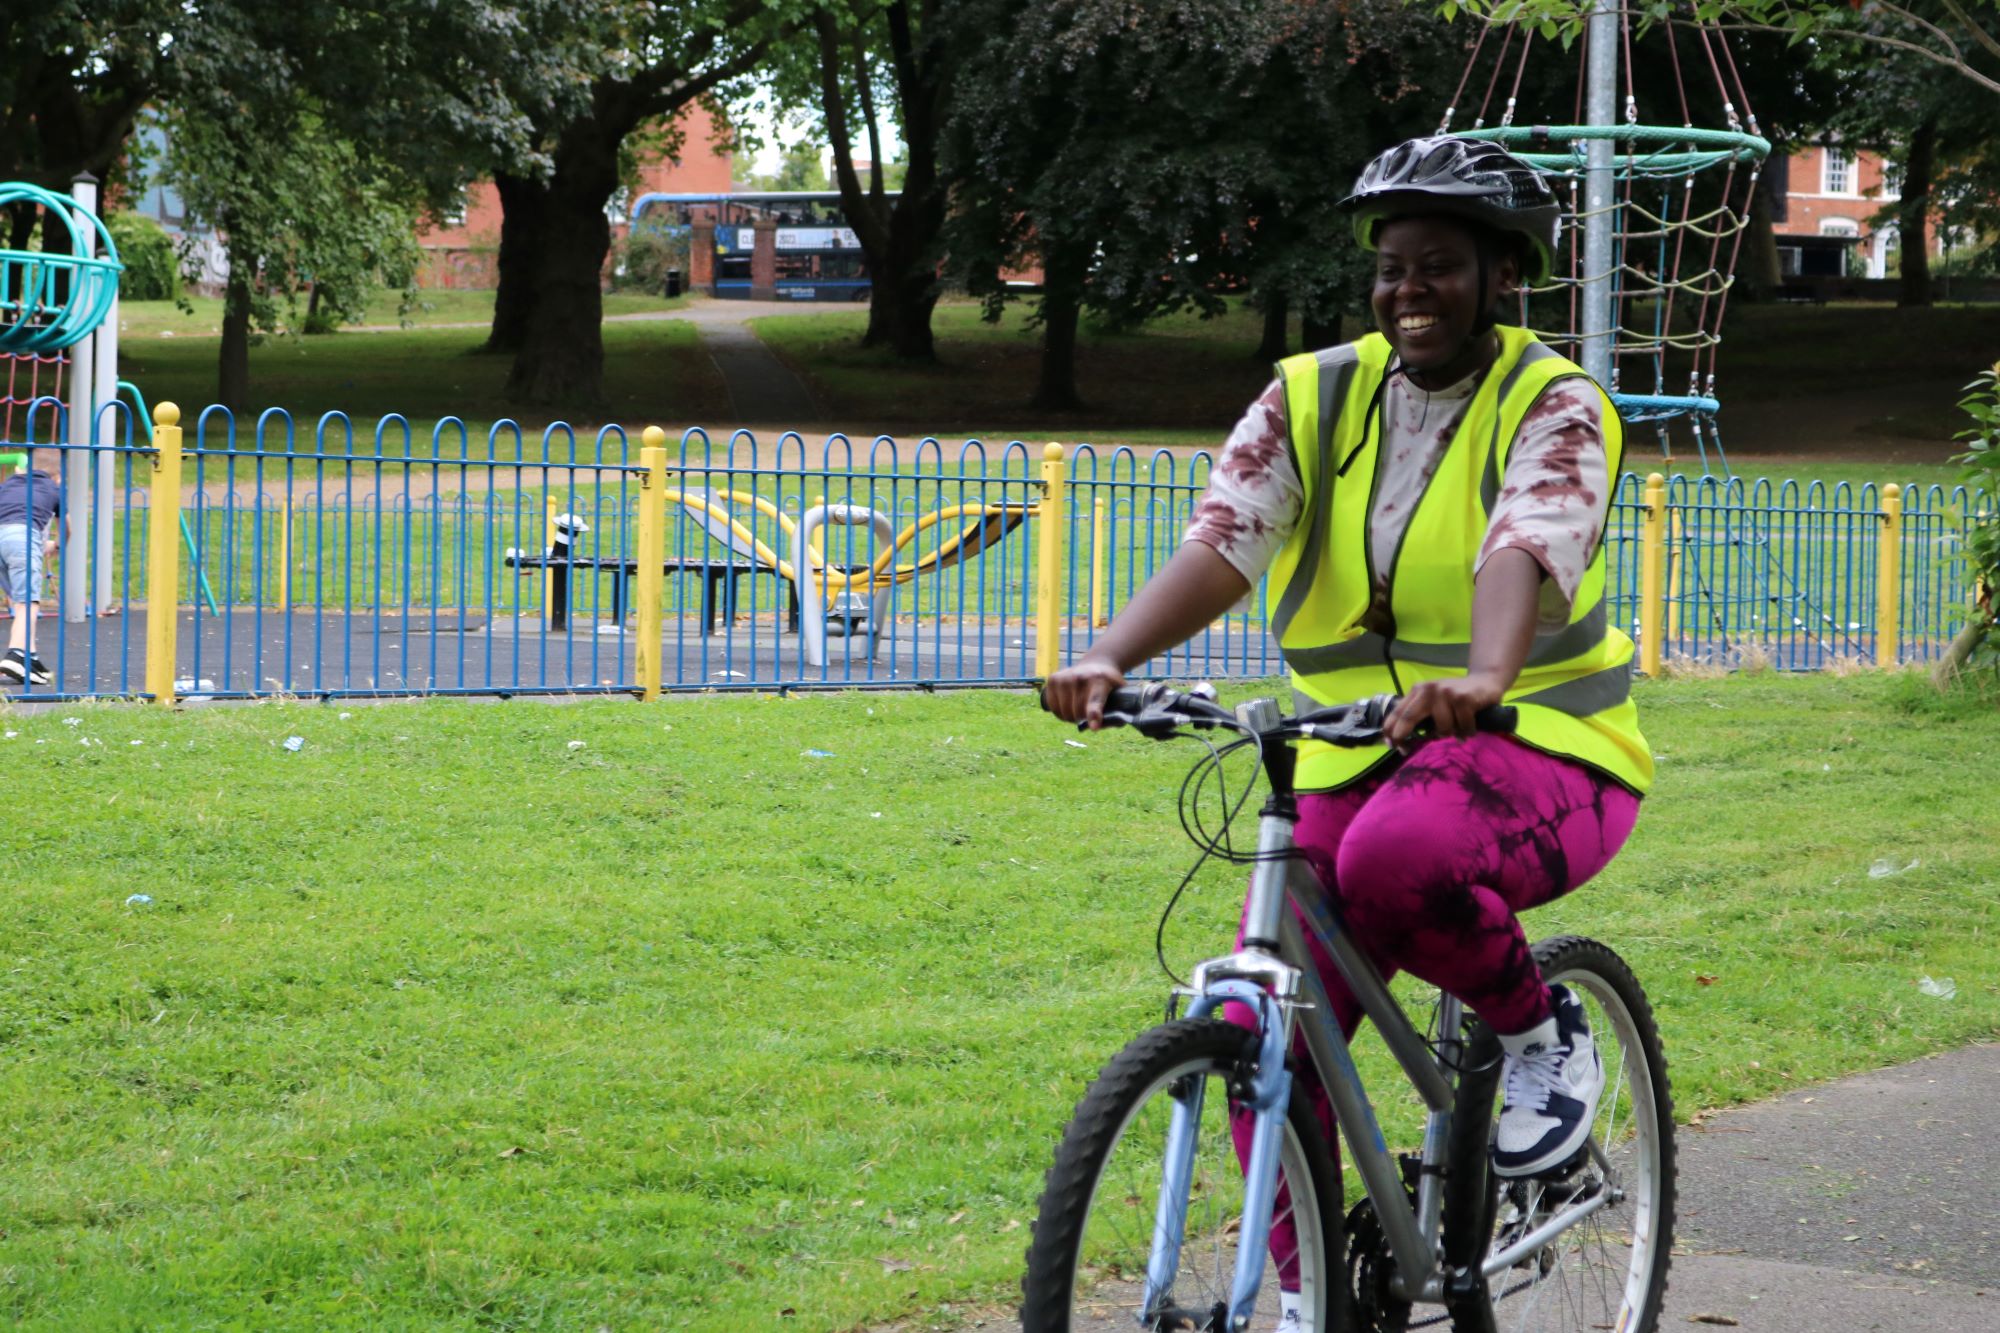 A woman cycling in a park in front of a playground. She is smiling